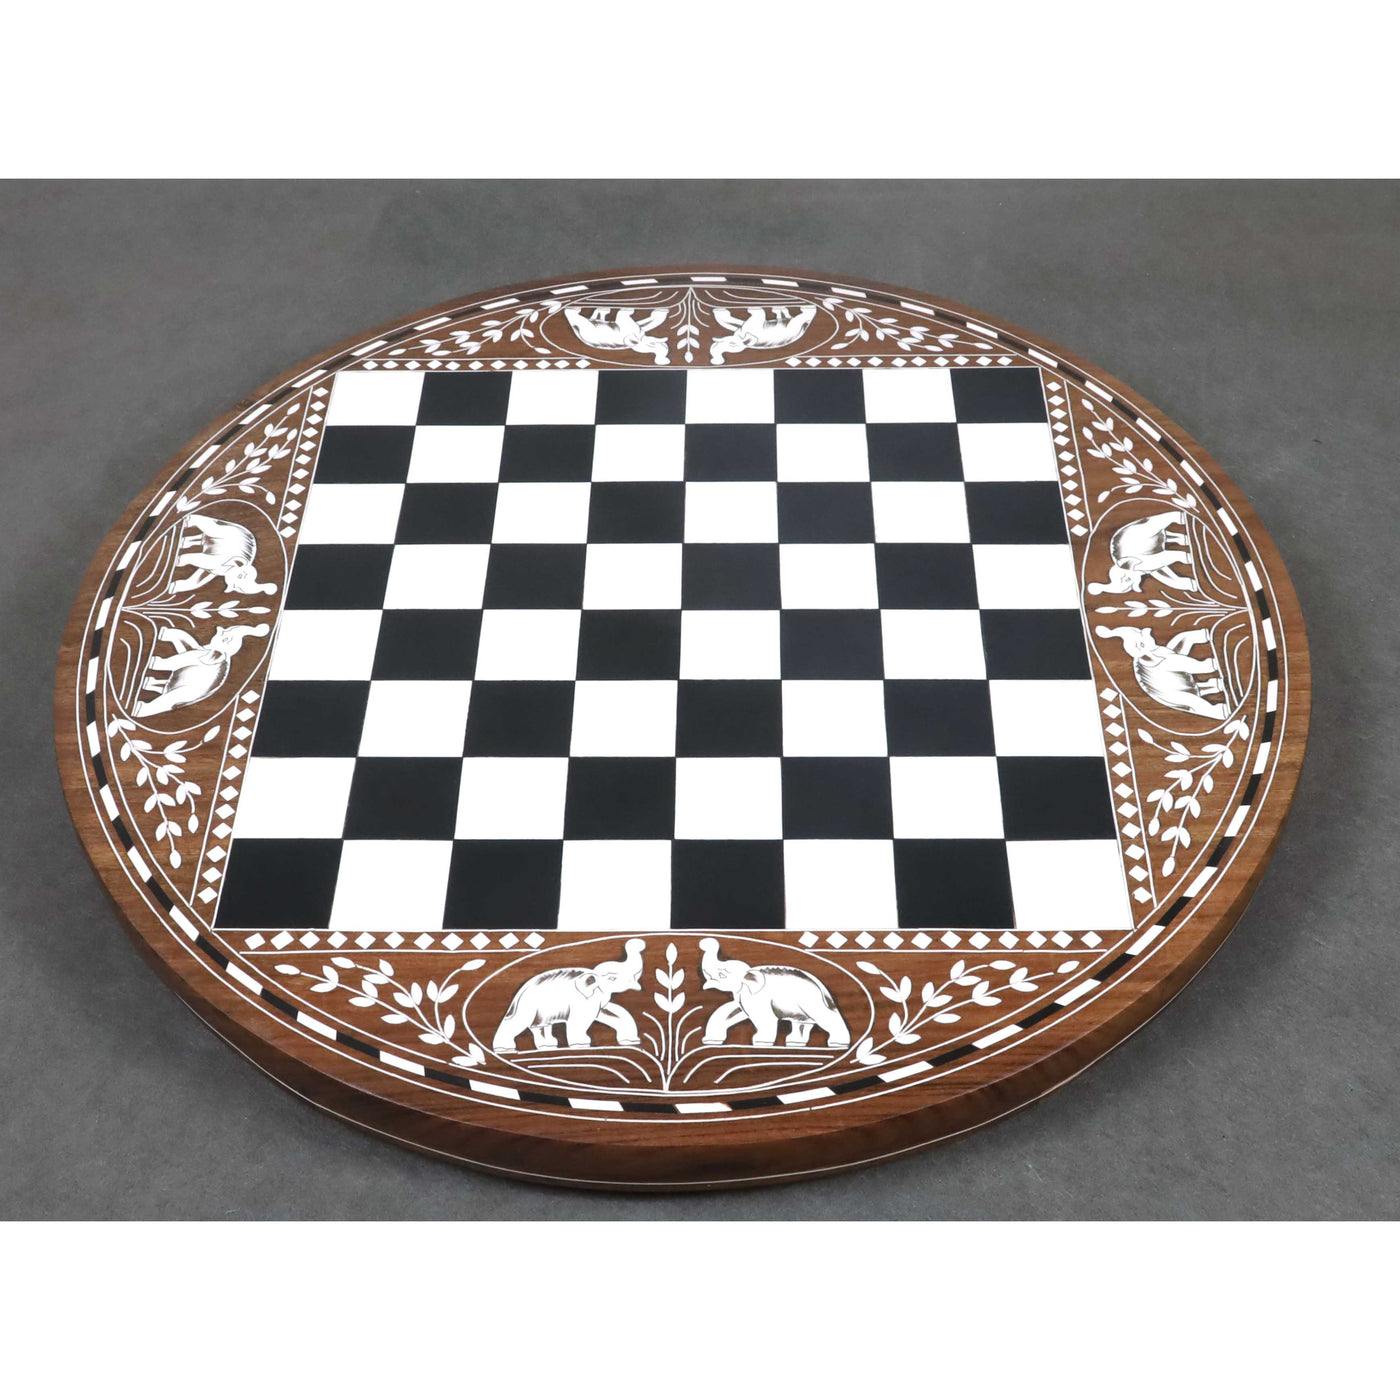 Round Wooden Chess Board Table - Chess Pieces Only